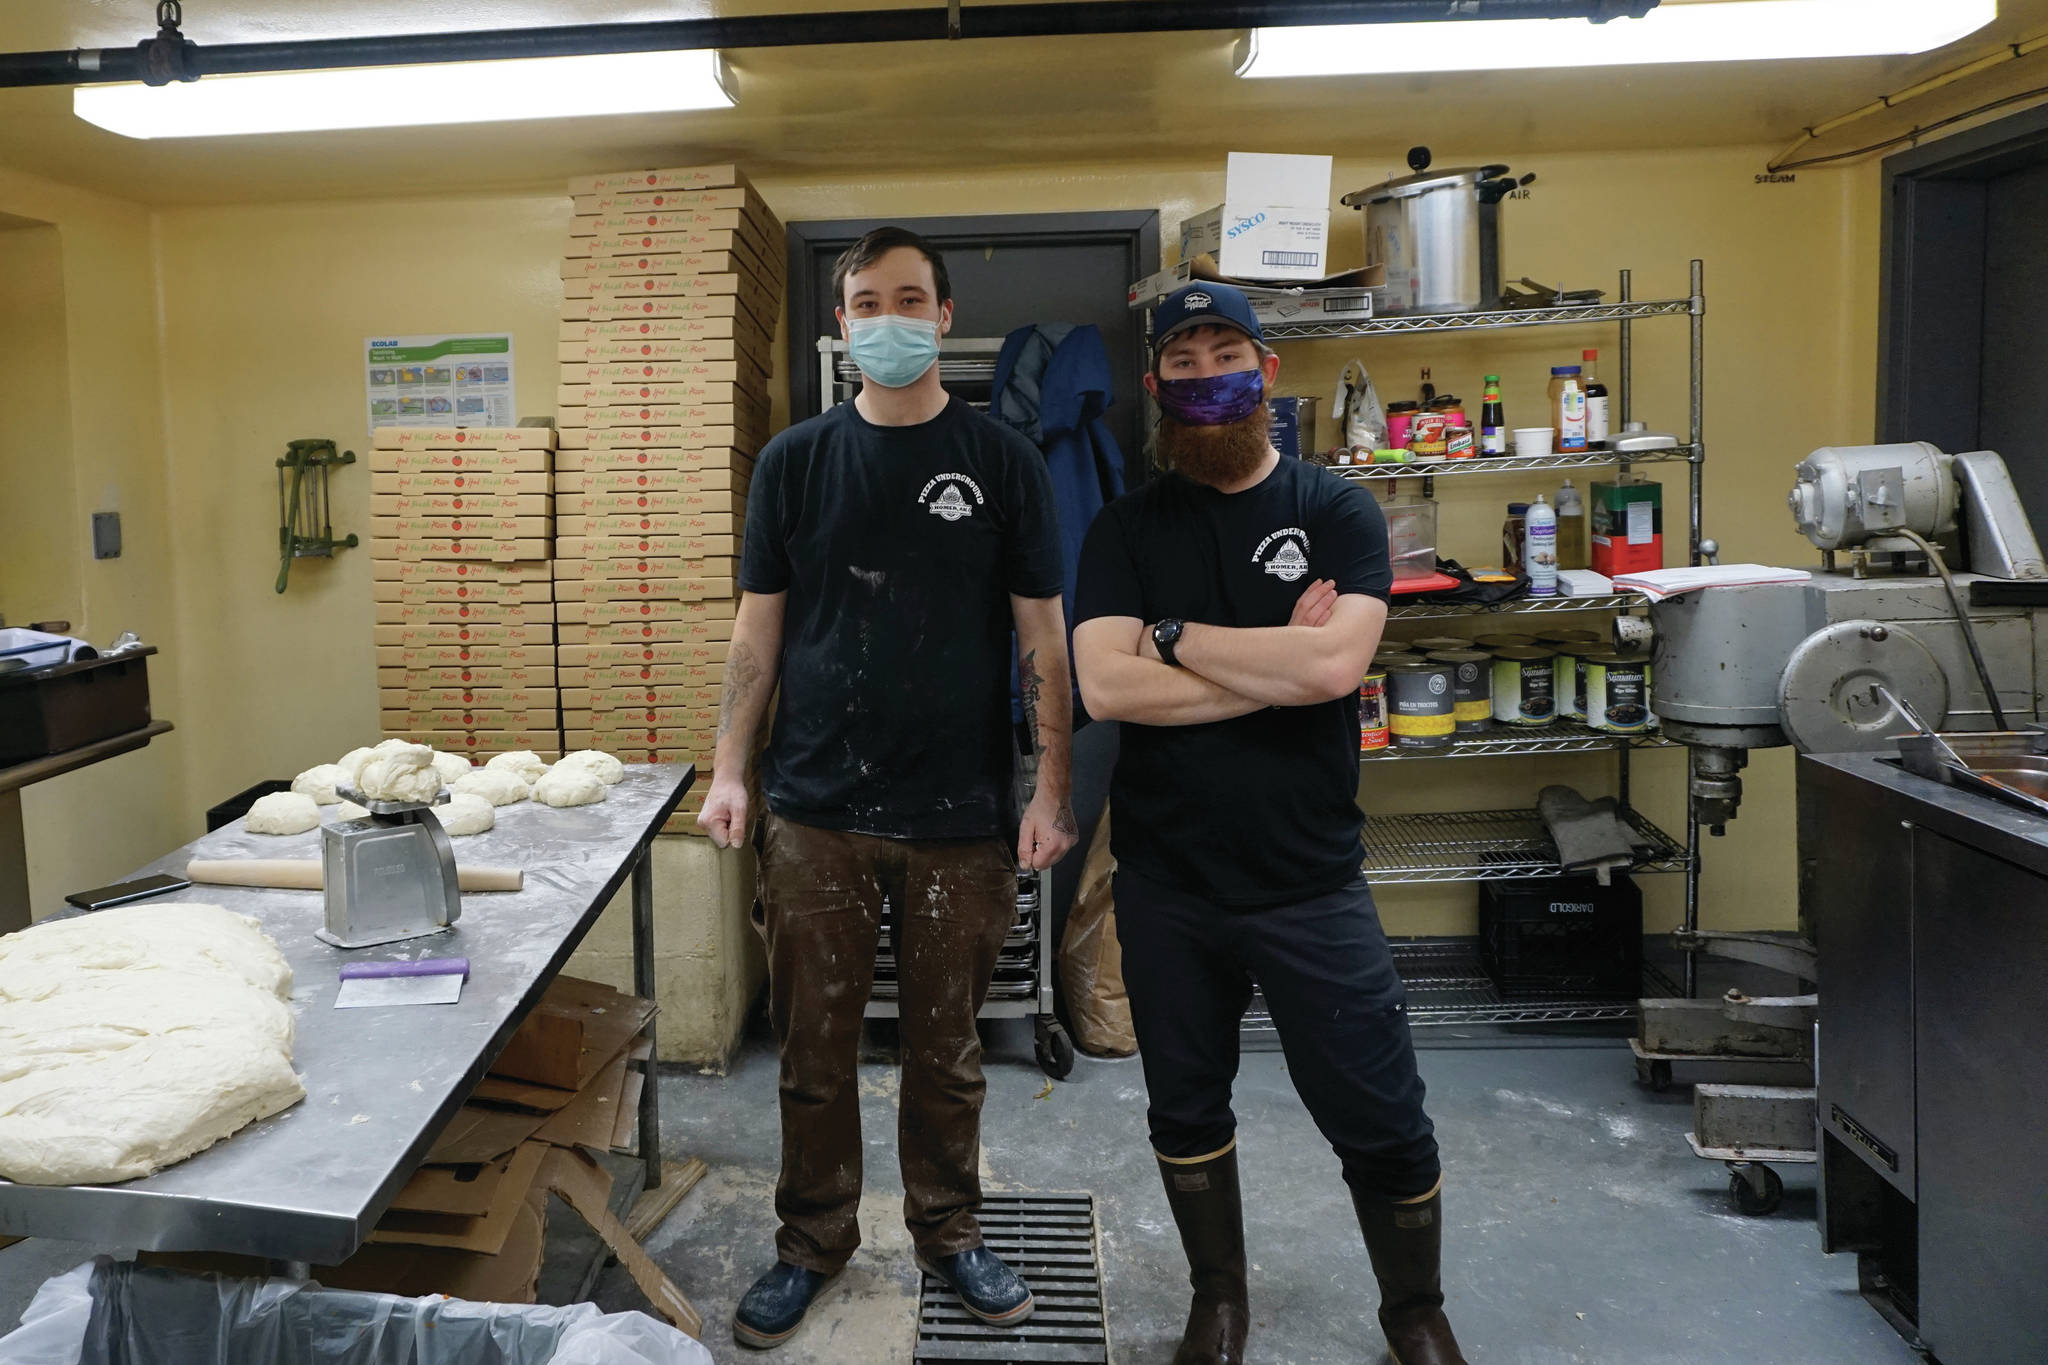 Pizza Underground owner Ethan Eutsler, right, and coworker Jack Pierre, left, take a break from making pizza dough on Tuesday, Dec. 1, 2020, the opening day of the business, in the basement of Alice’s Champagne Palace in Homer, Alaska. (Photo by Michael Armstrong/Homer News)